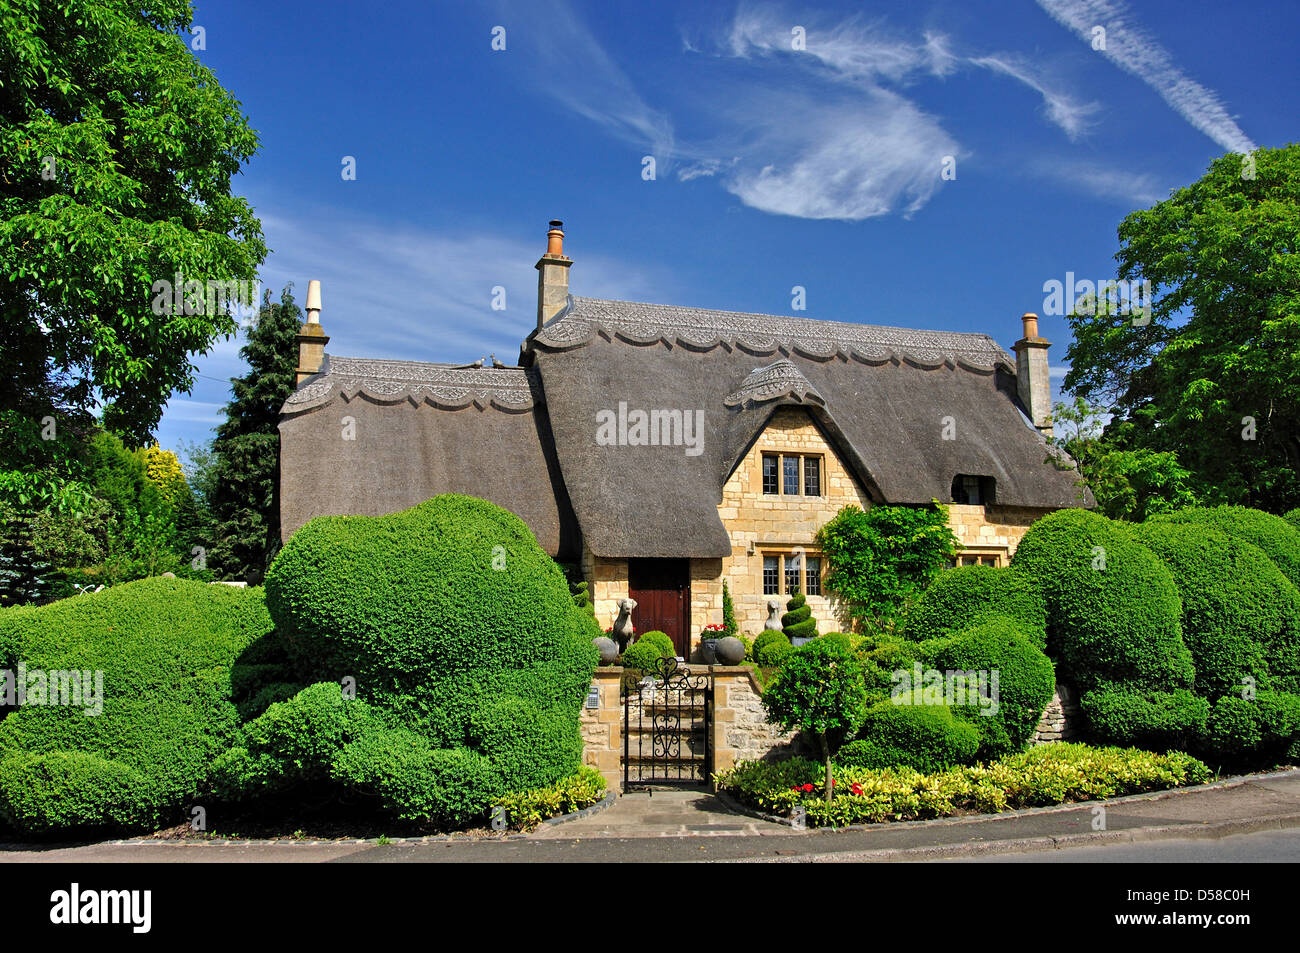 Thatched cottage, Chipping Campden, Cotswolds, Gloucestershire, England, United Kingdom Stock Photo